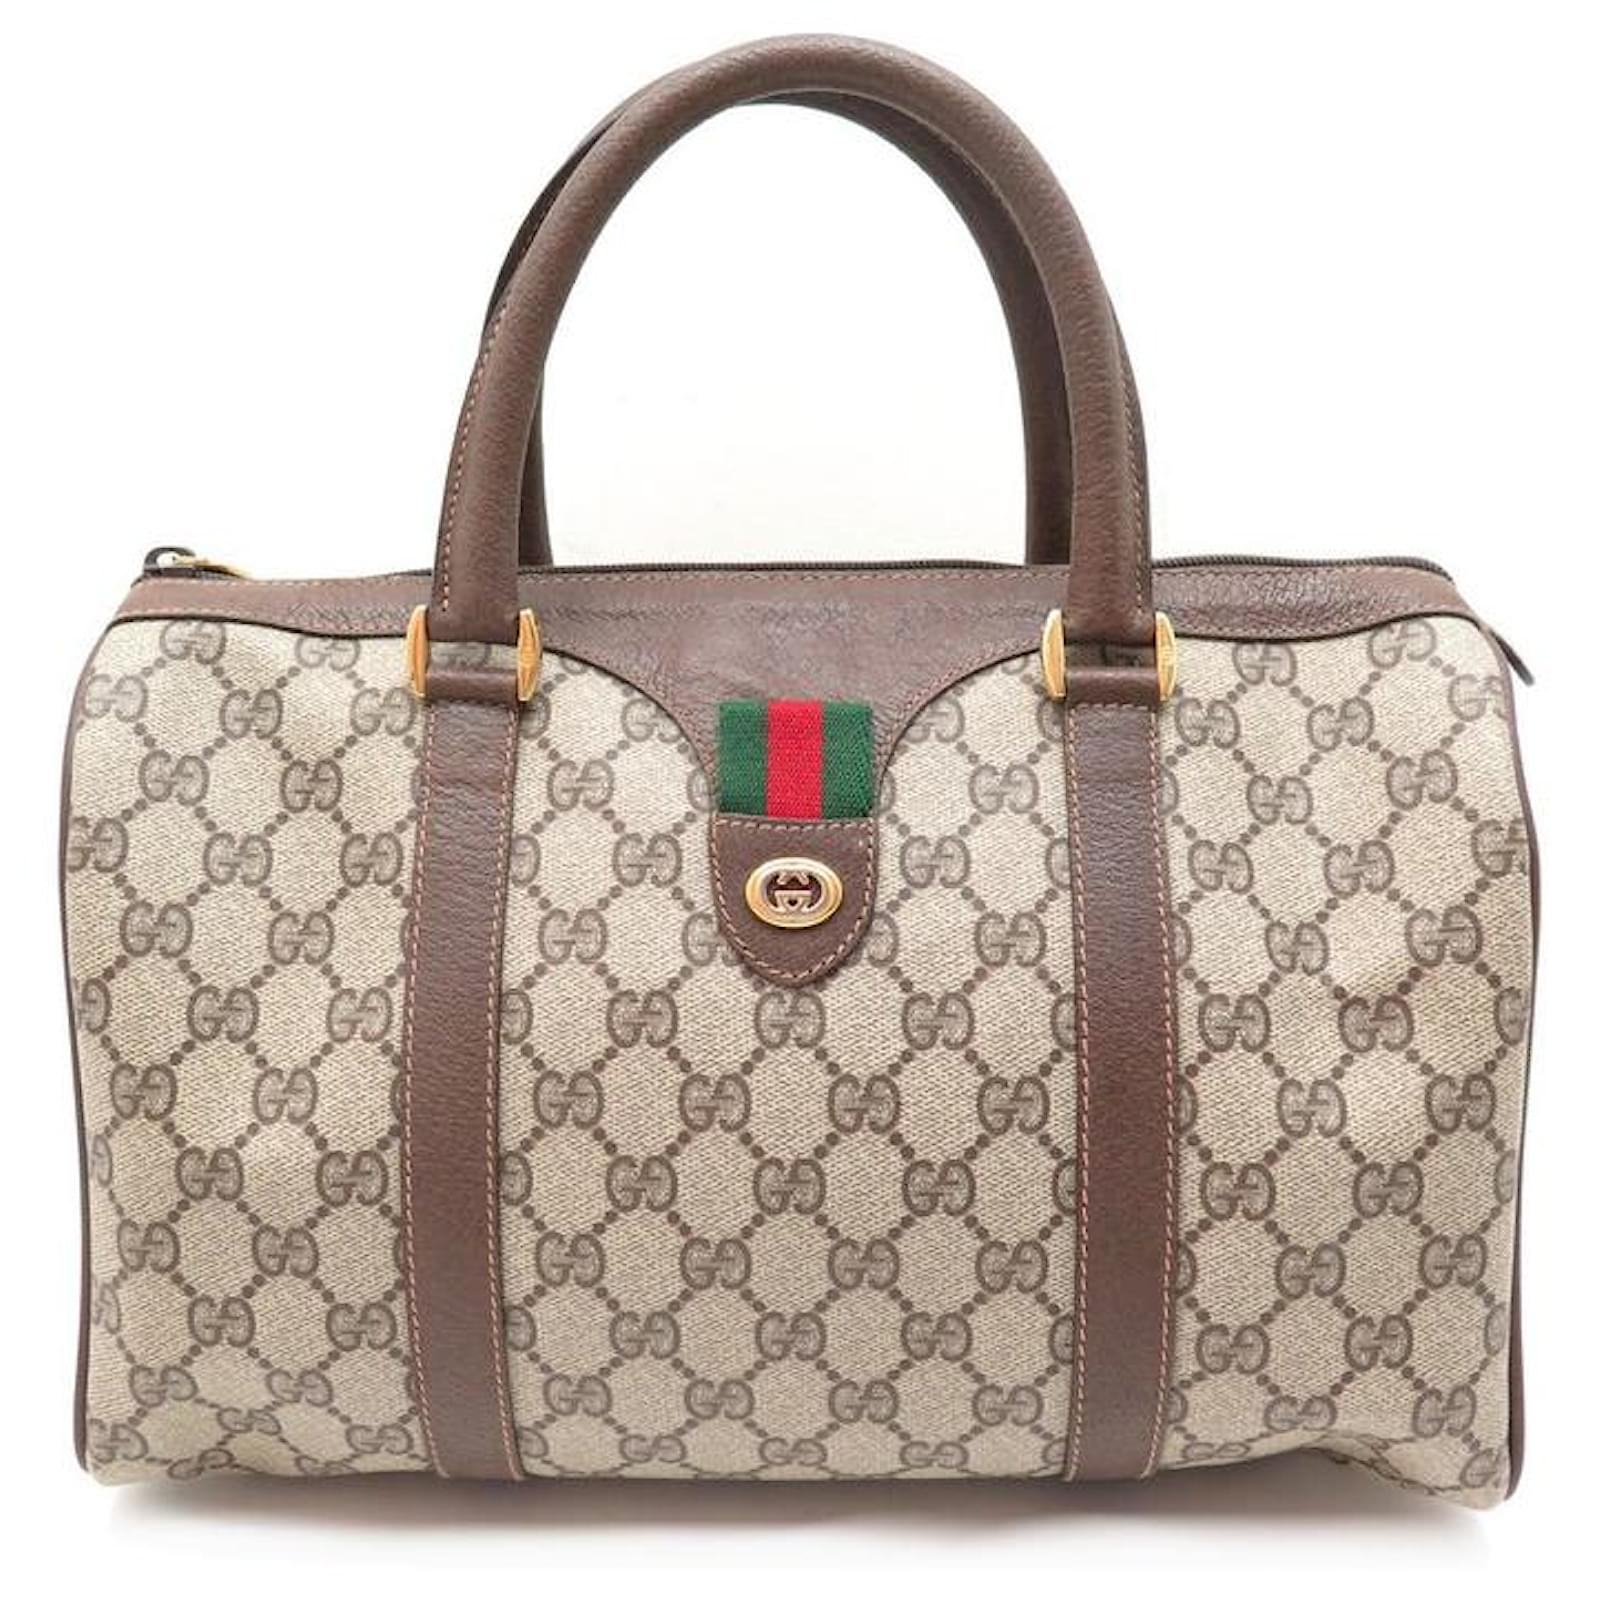 Awra Has An Impressive Designer Bag Collection Filled With Gucci